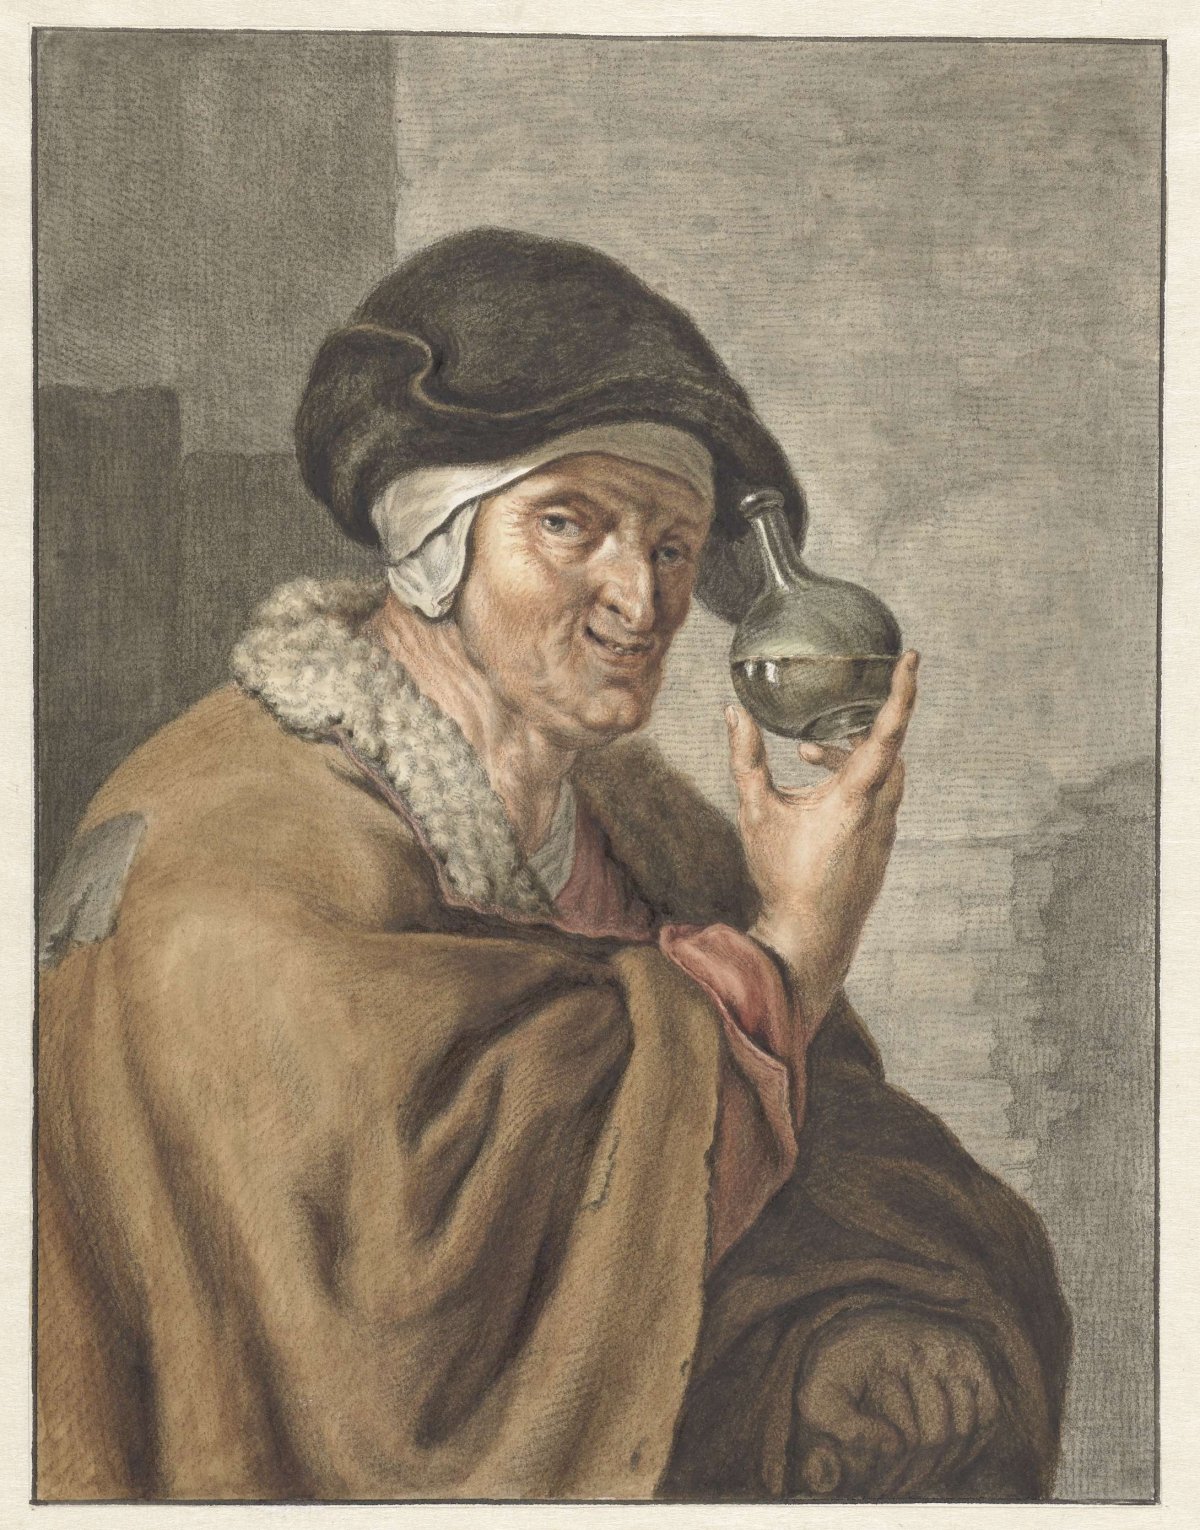 Old woman with a urine glass, Abraham Delfos, 1741 - 1820